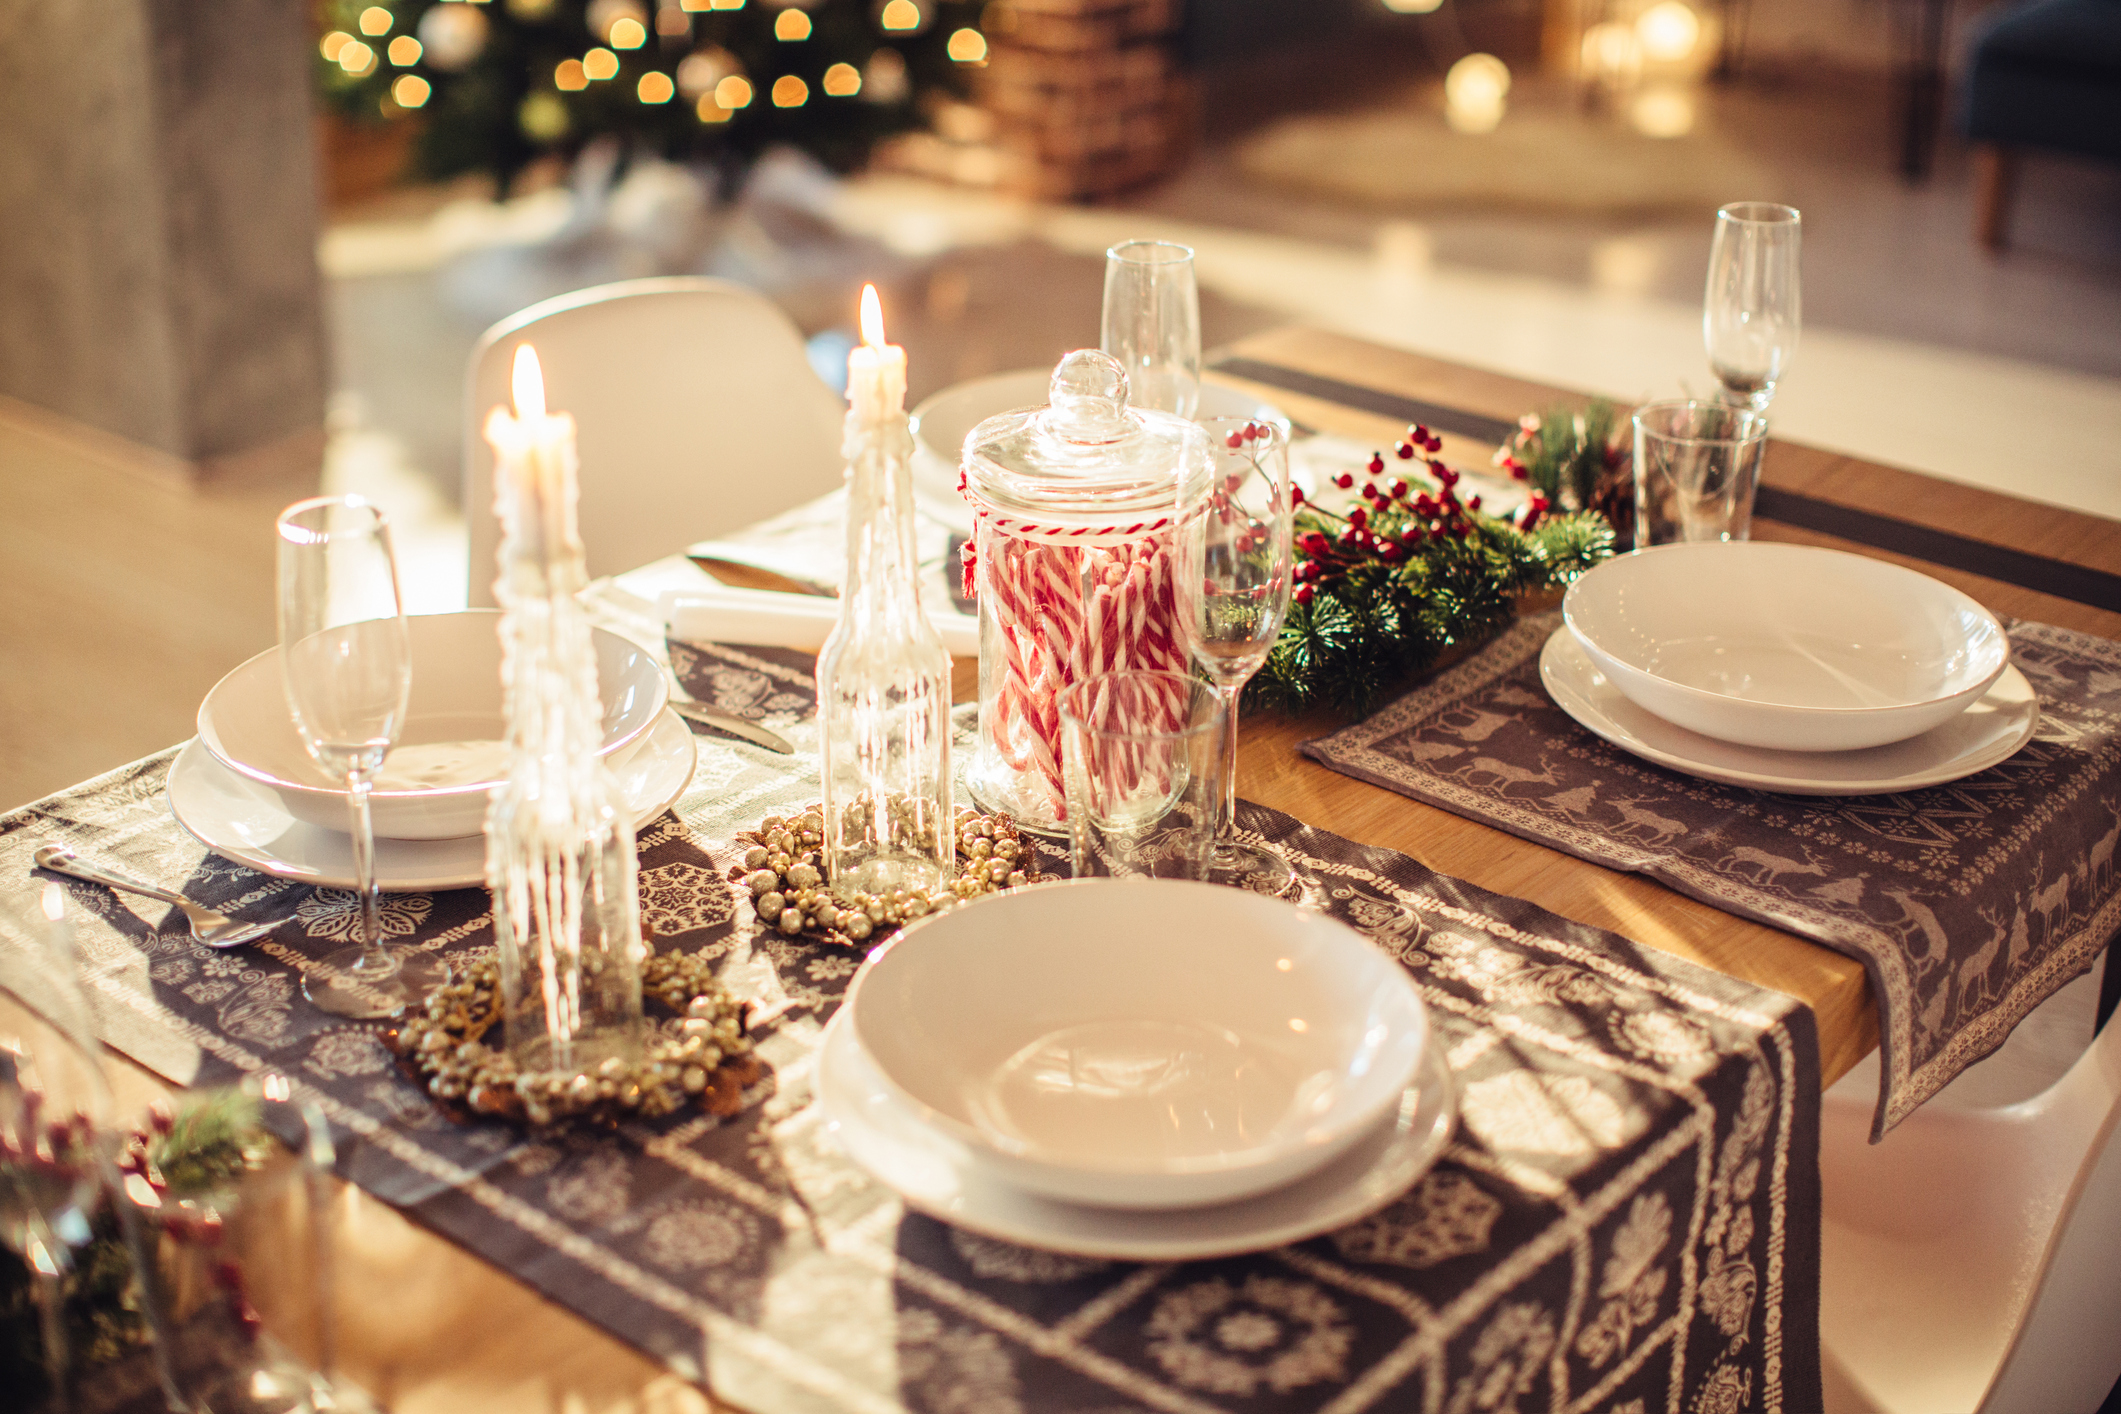 10 Festive Finds to Spruce Up Your Holiday Table